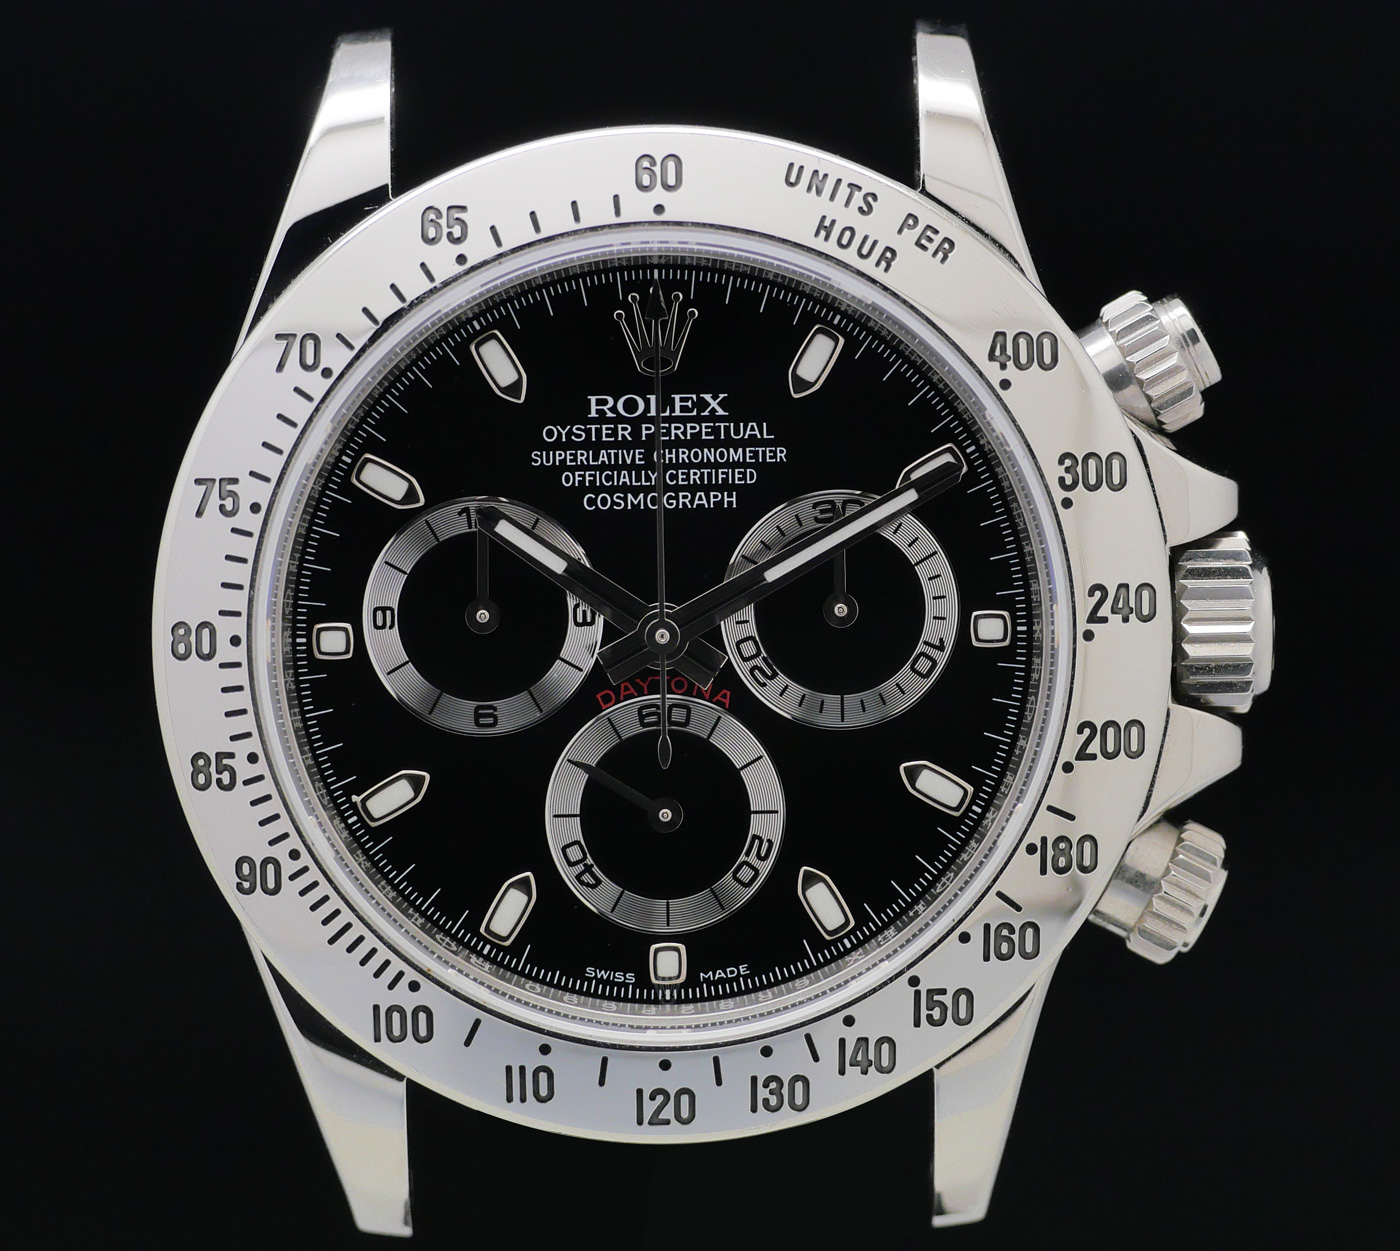 The Rolex Daytona 116520: A Watch of Perfection